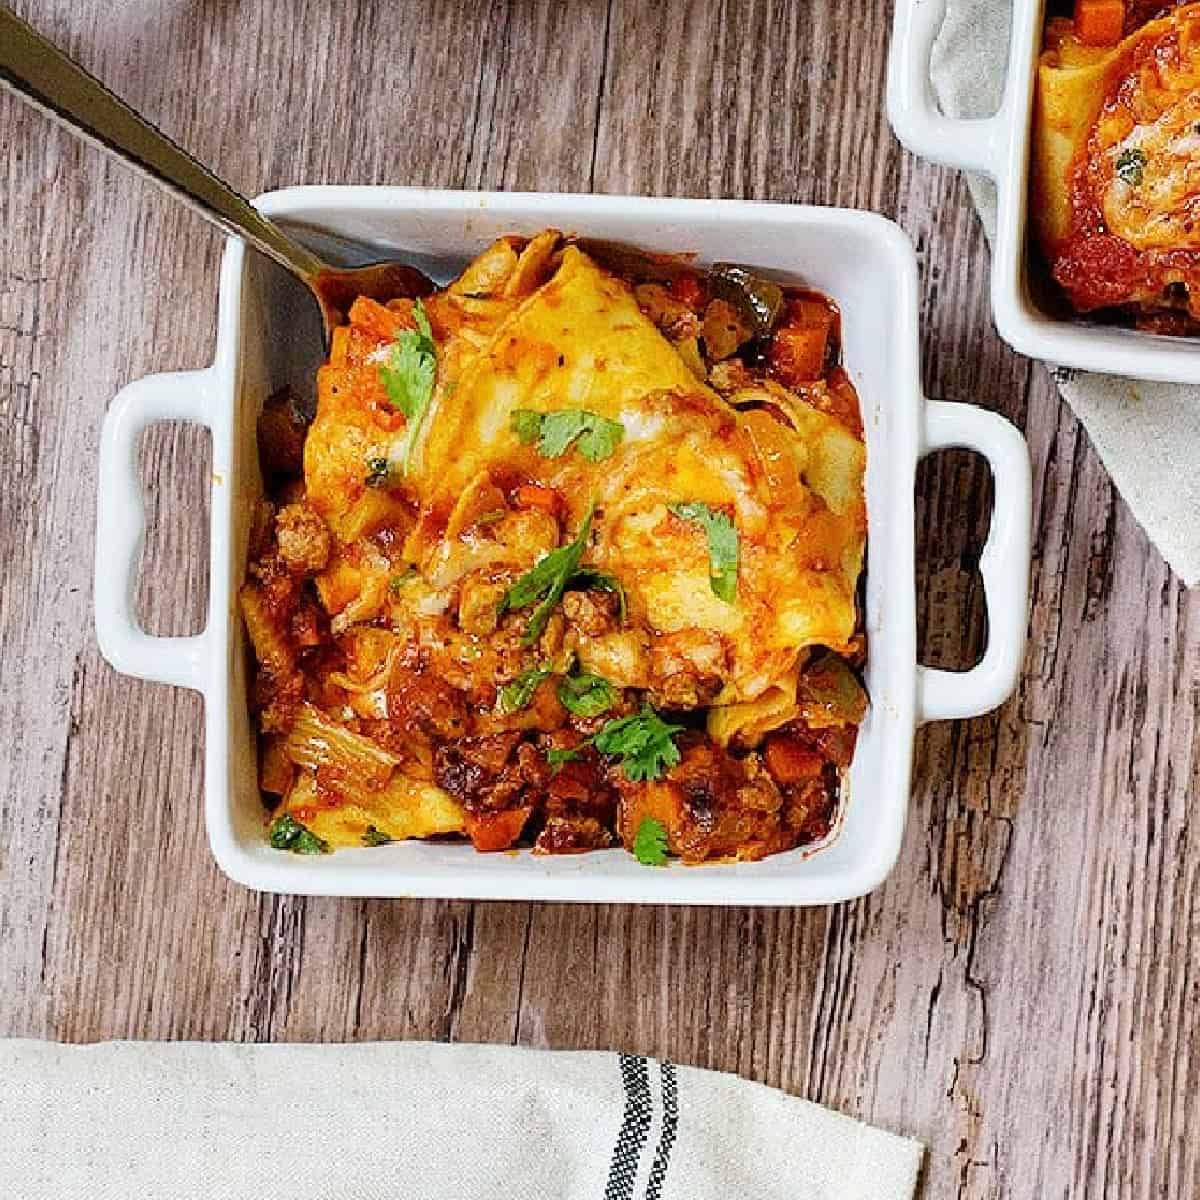 This cheesy lazy lasagna is the answer to "What should I make tonight?". It's made with ingredients that are already at hand plus a shortcut!
